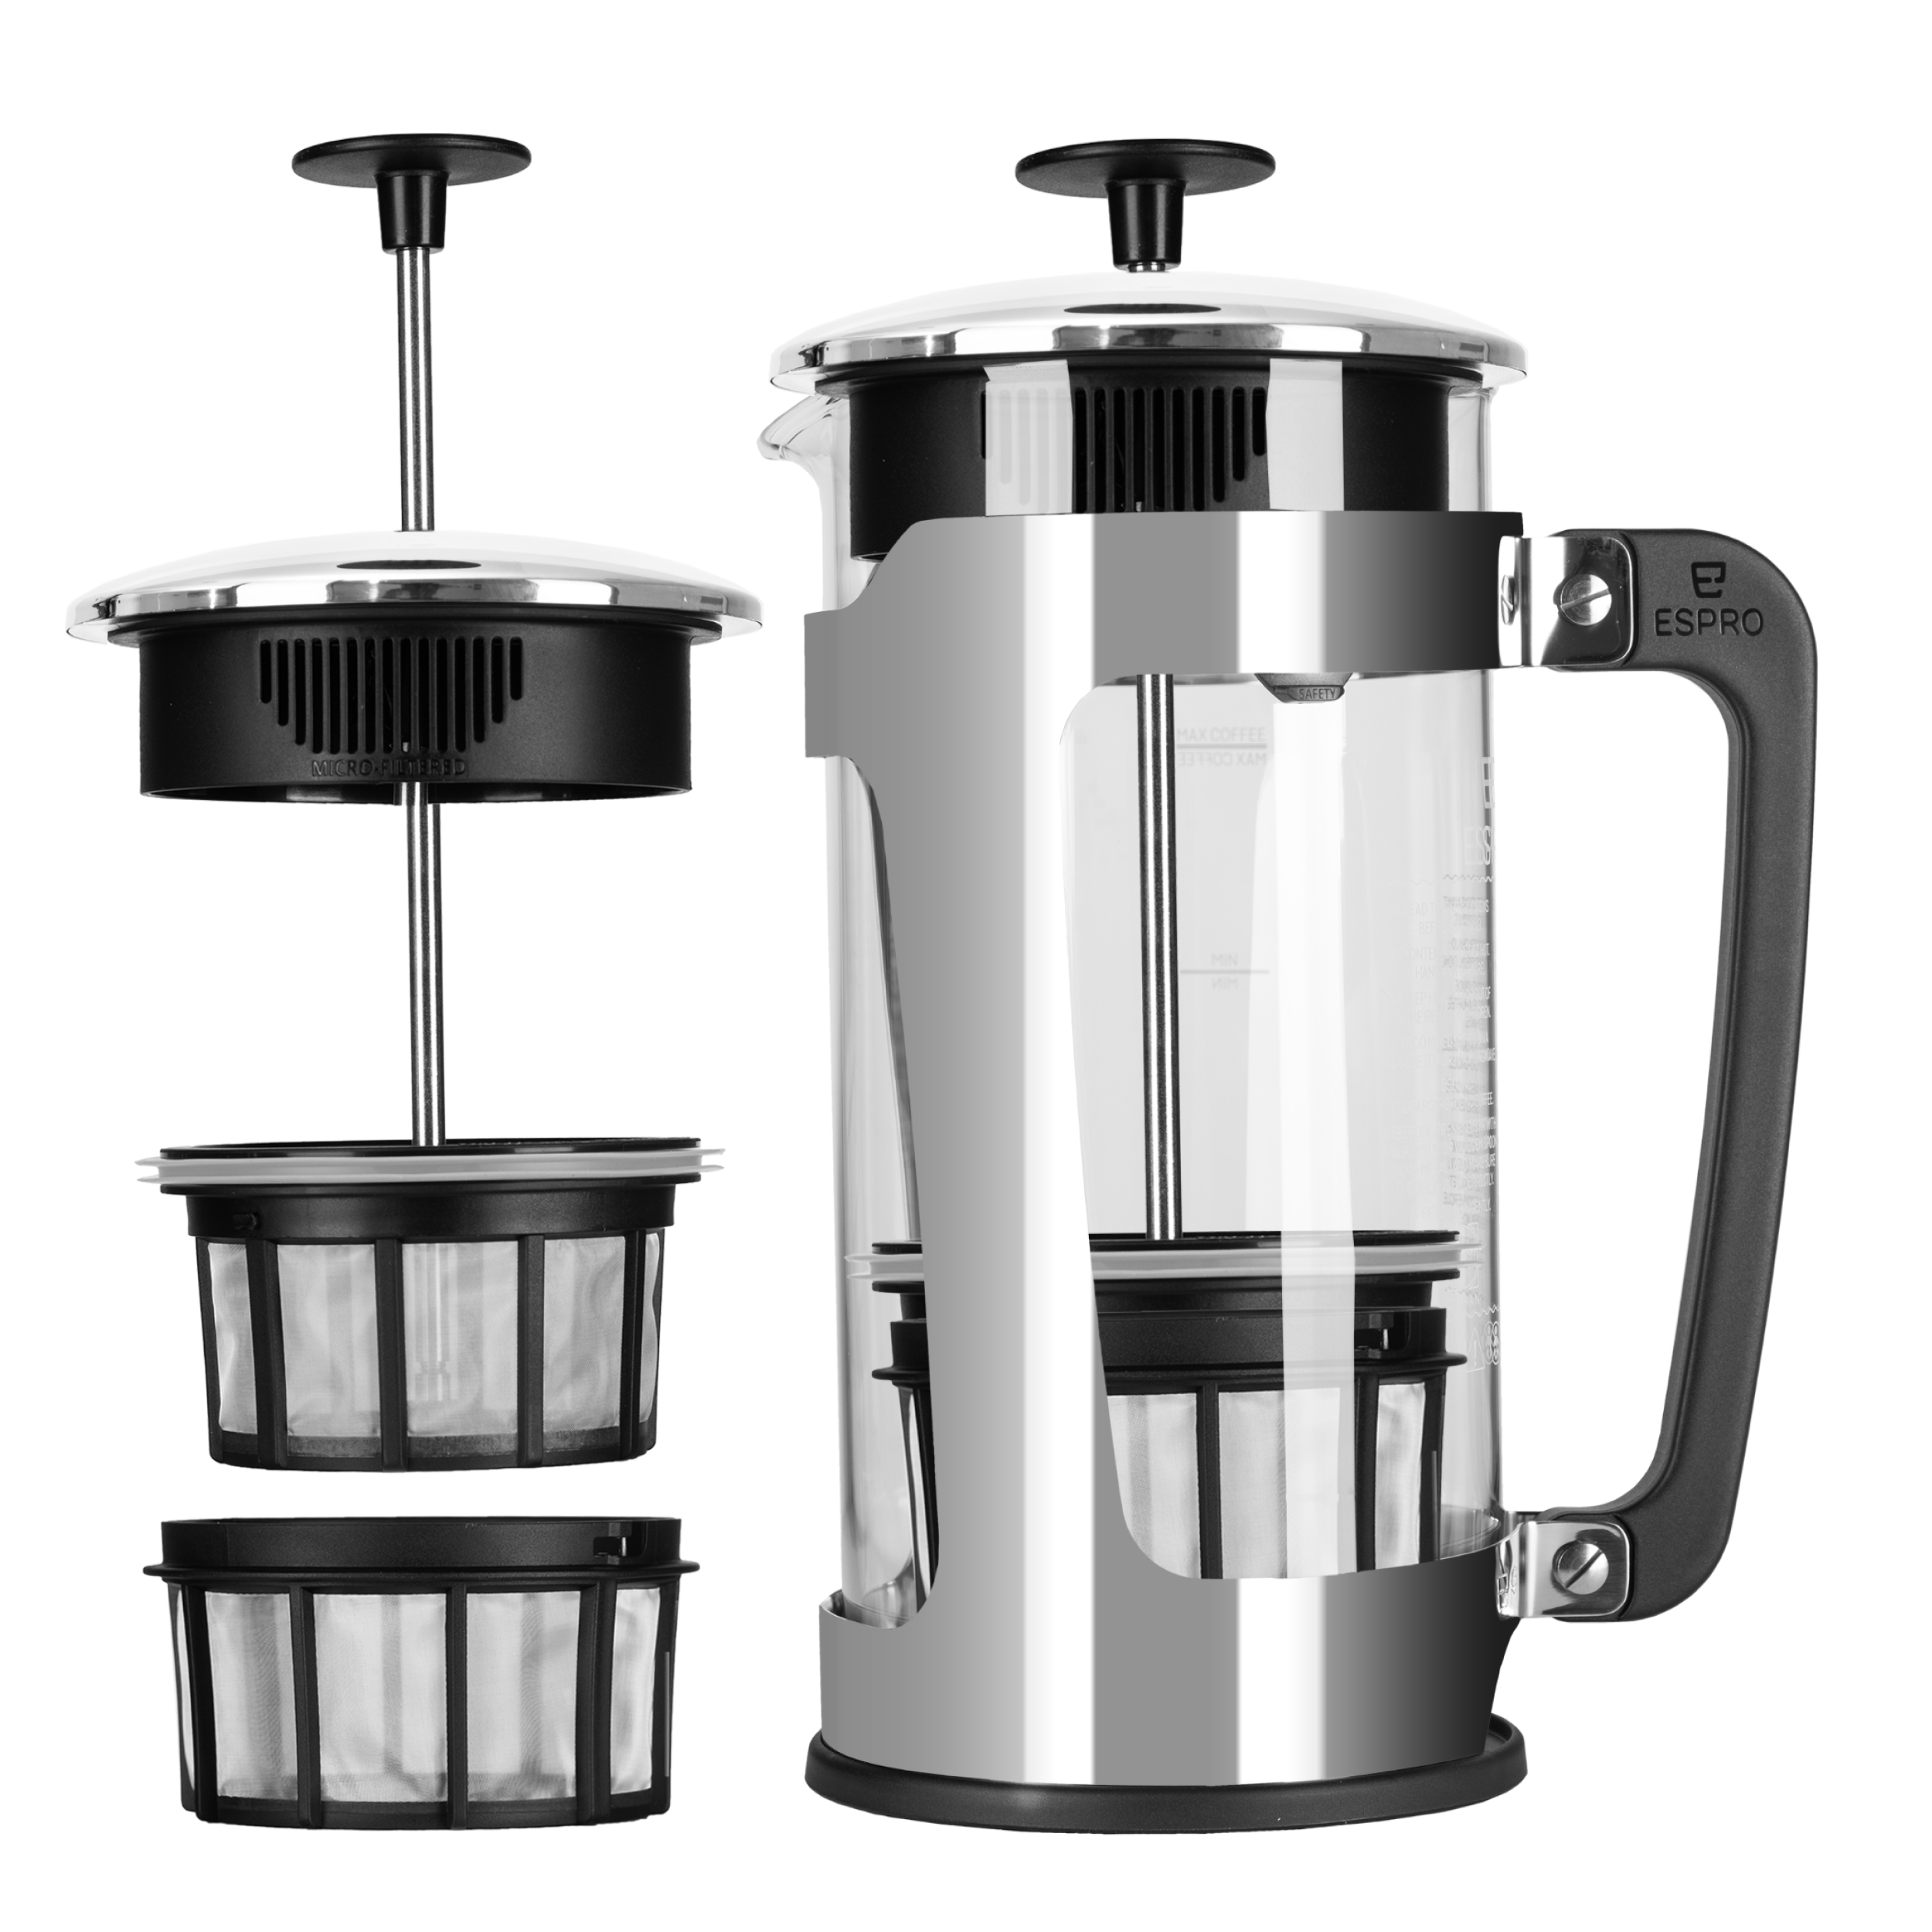 French Press Single Serving Coffee Maker By Small Perfect For Morning